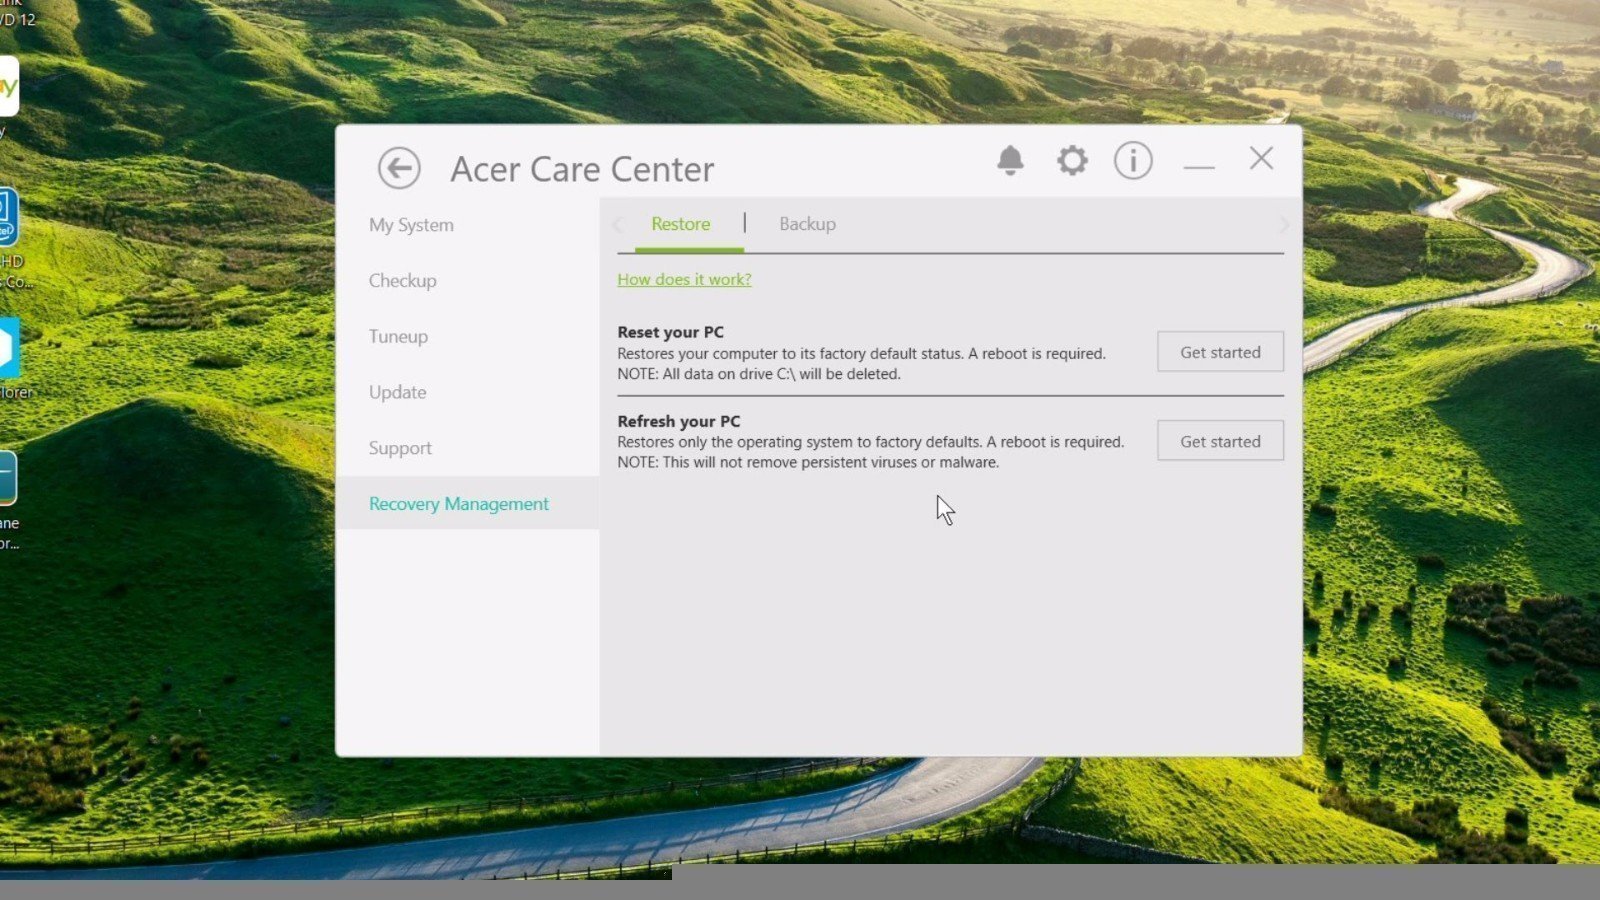 Acer Care Center Recovery Management